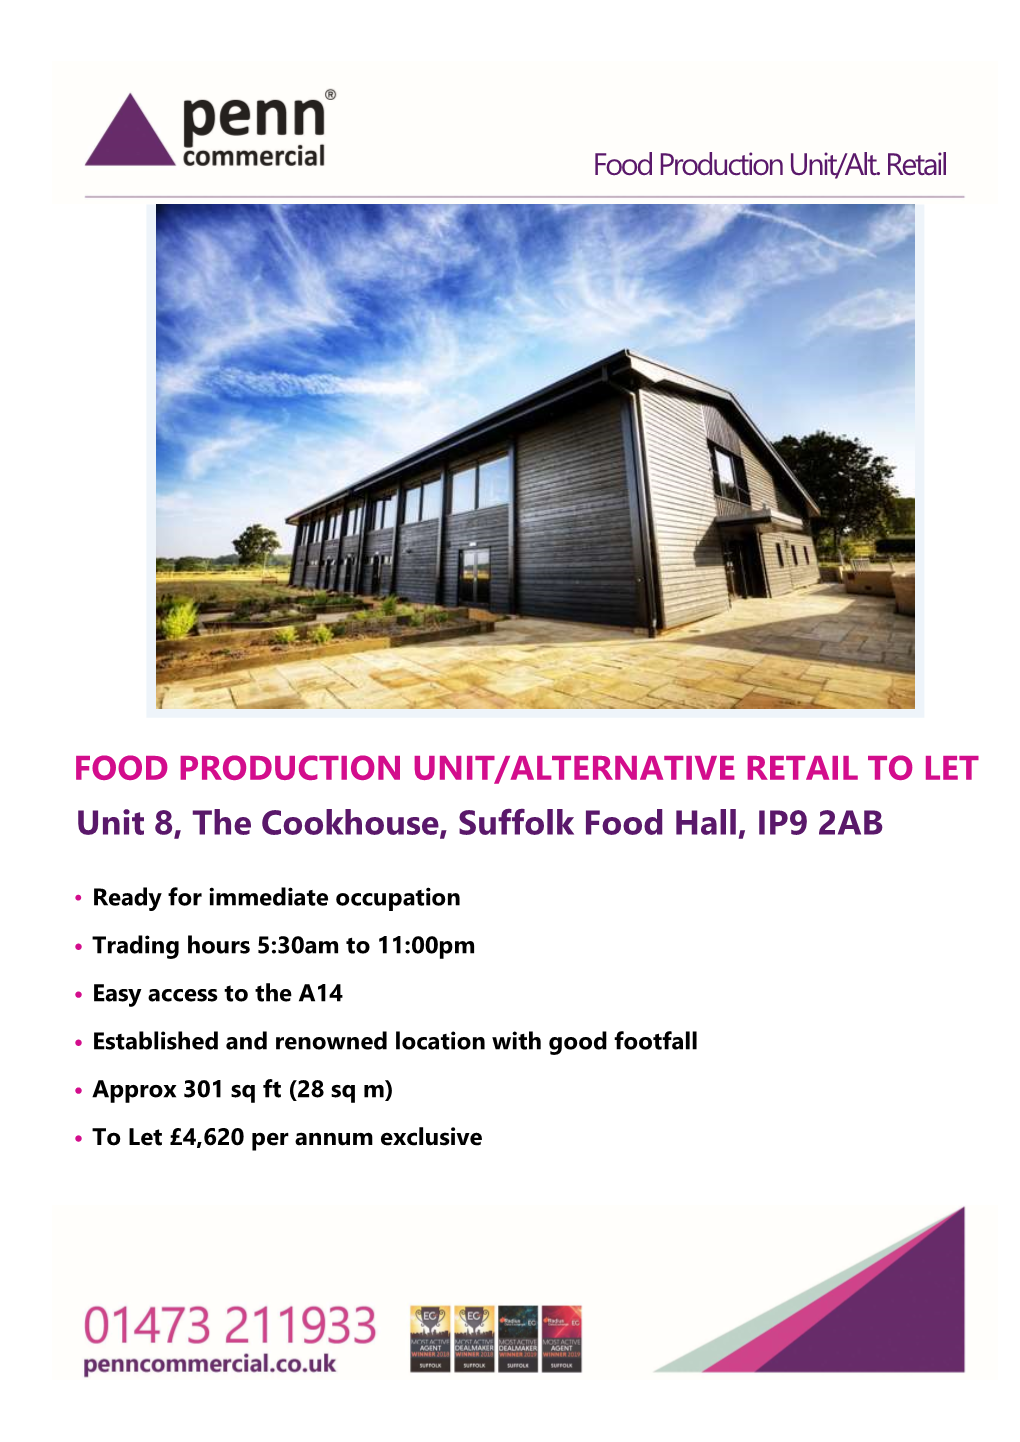 FOOD PRODUCTION UNIT/ALTERNATIVE RETAIL to LET Unit 8, the Cookhouse, Suffolk Food Hall, IP9 2AB